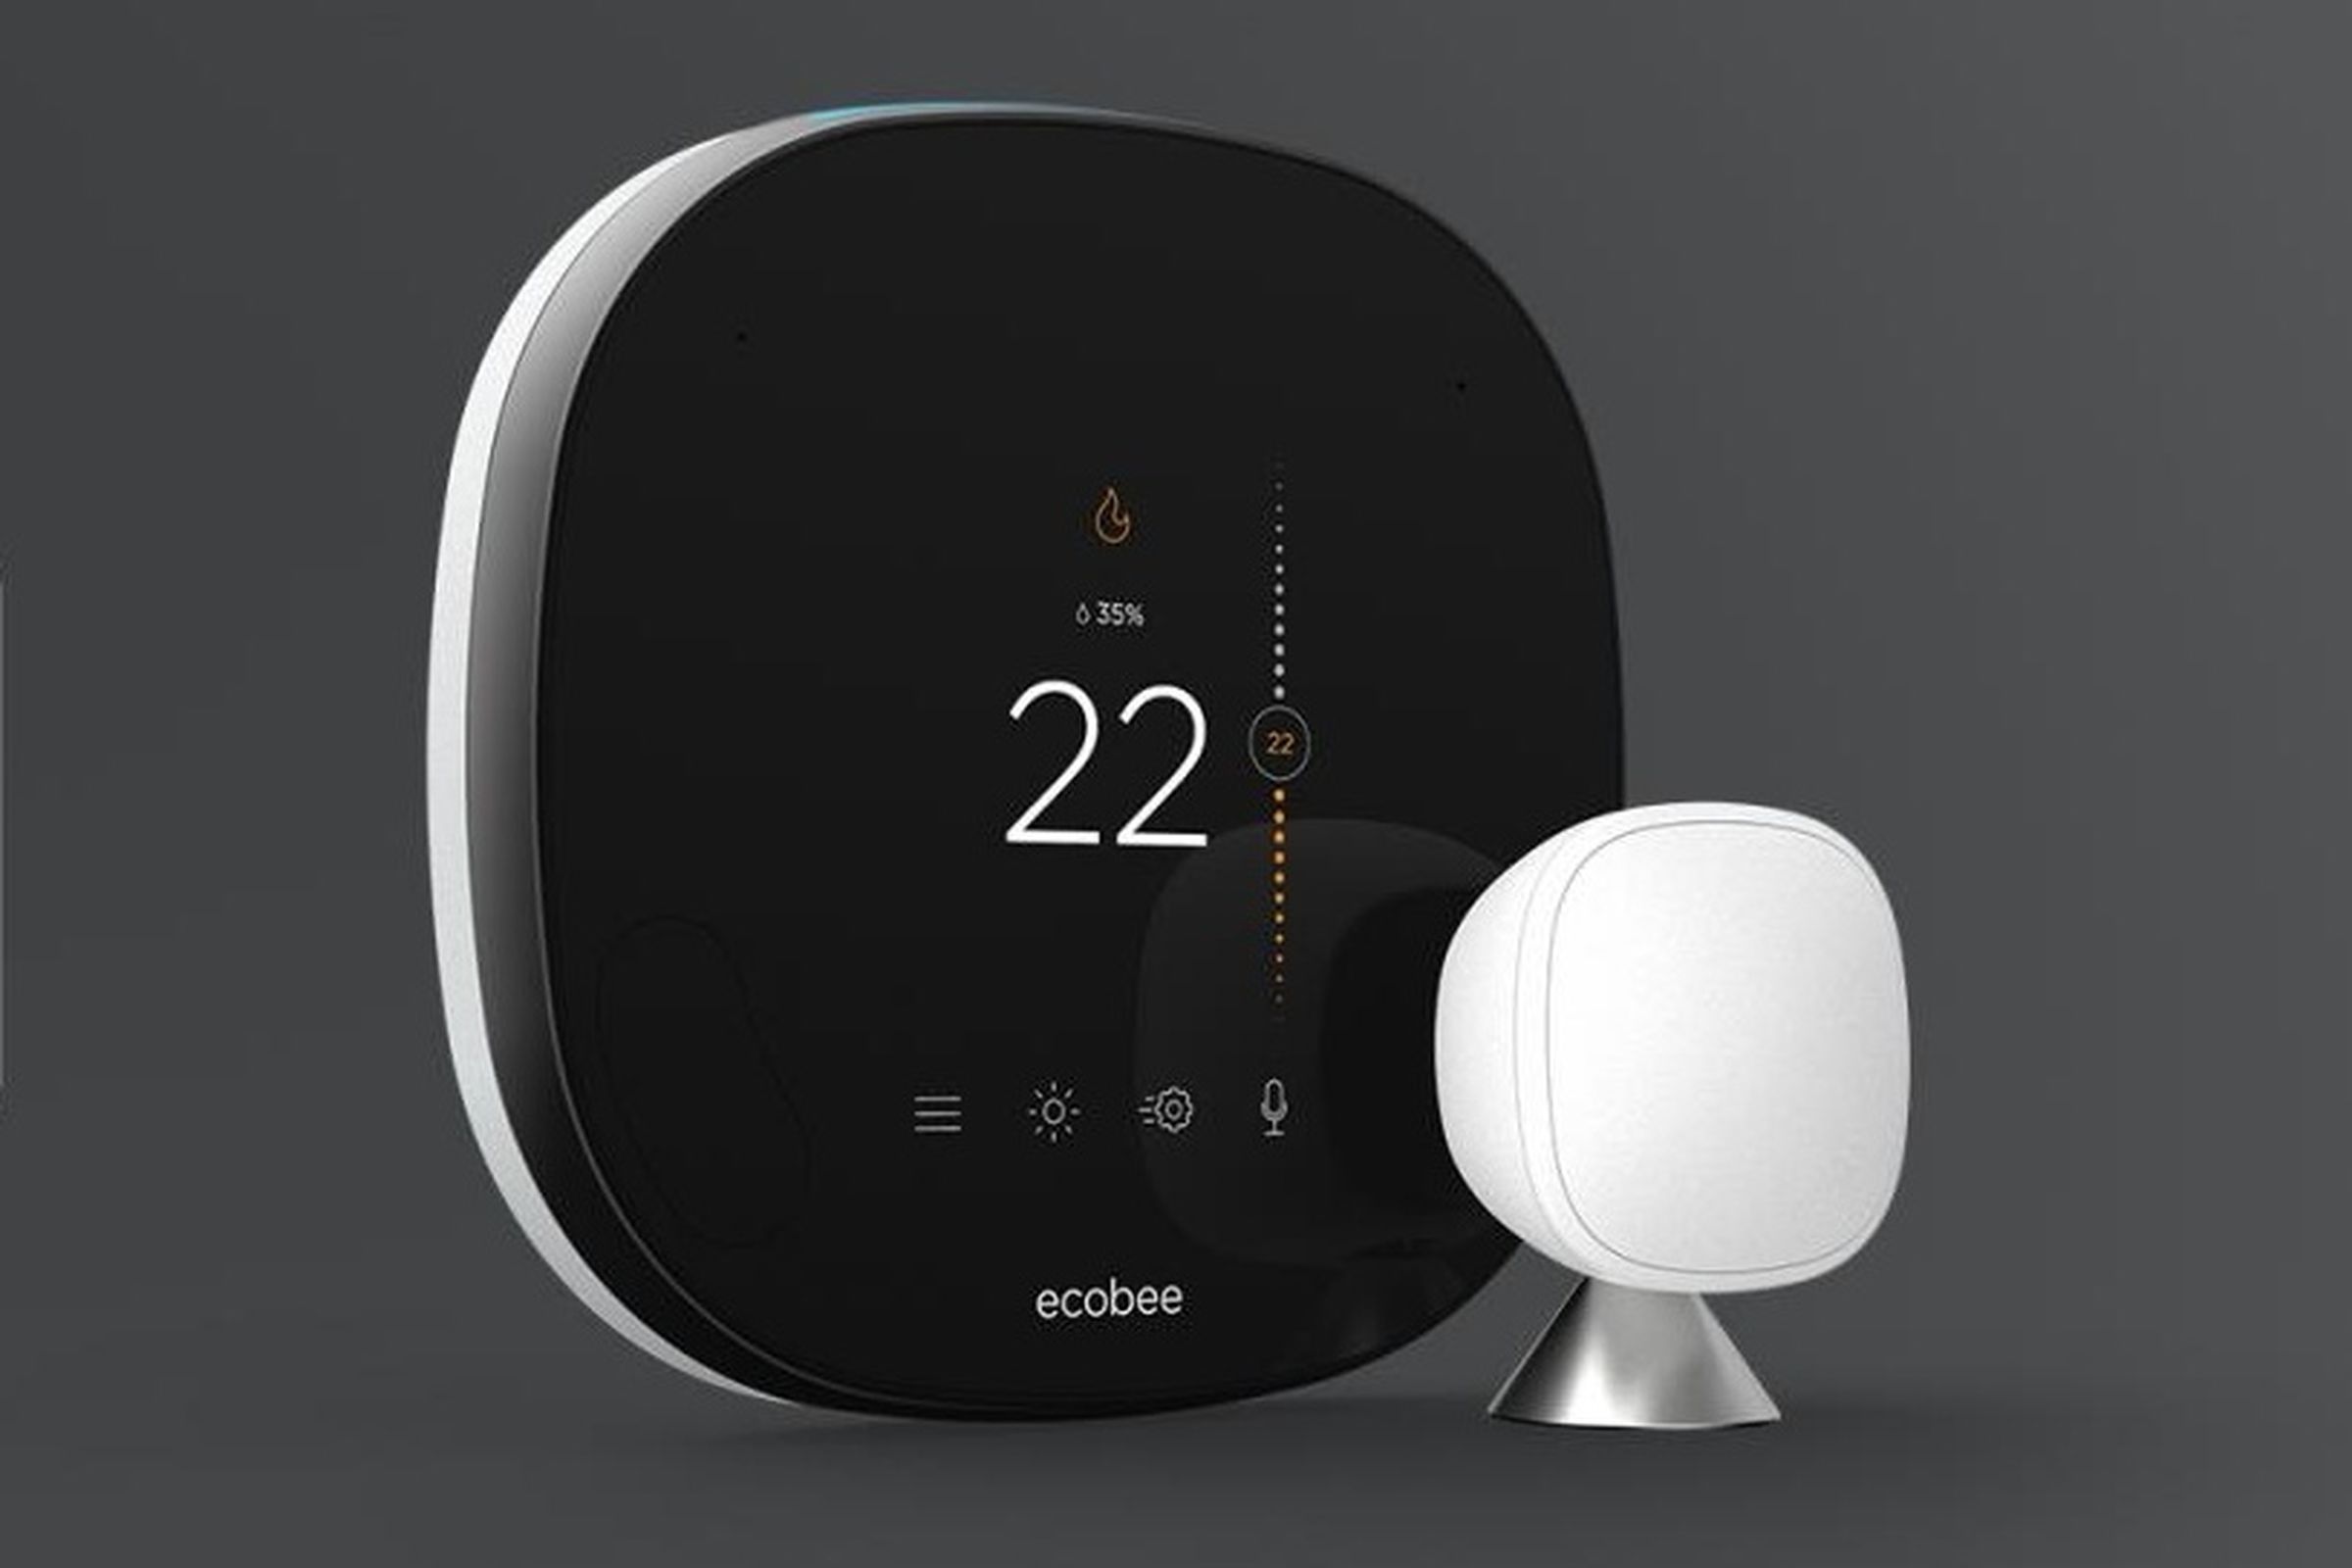 An Ecobee smart thermostat